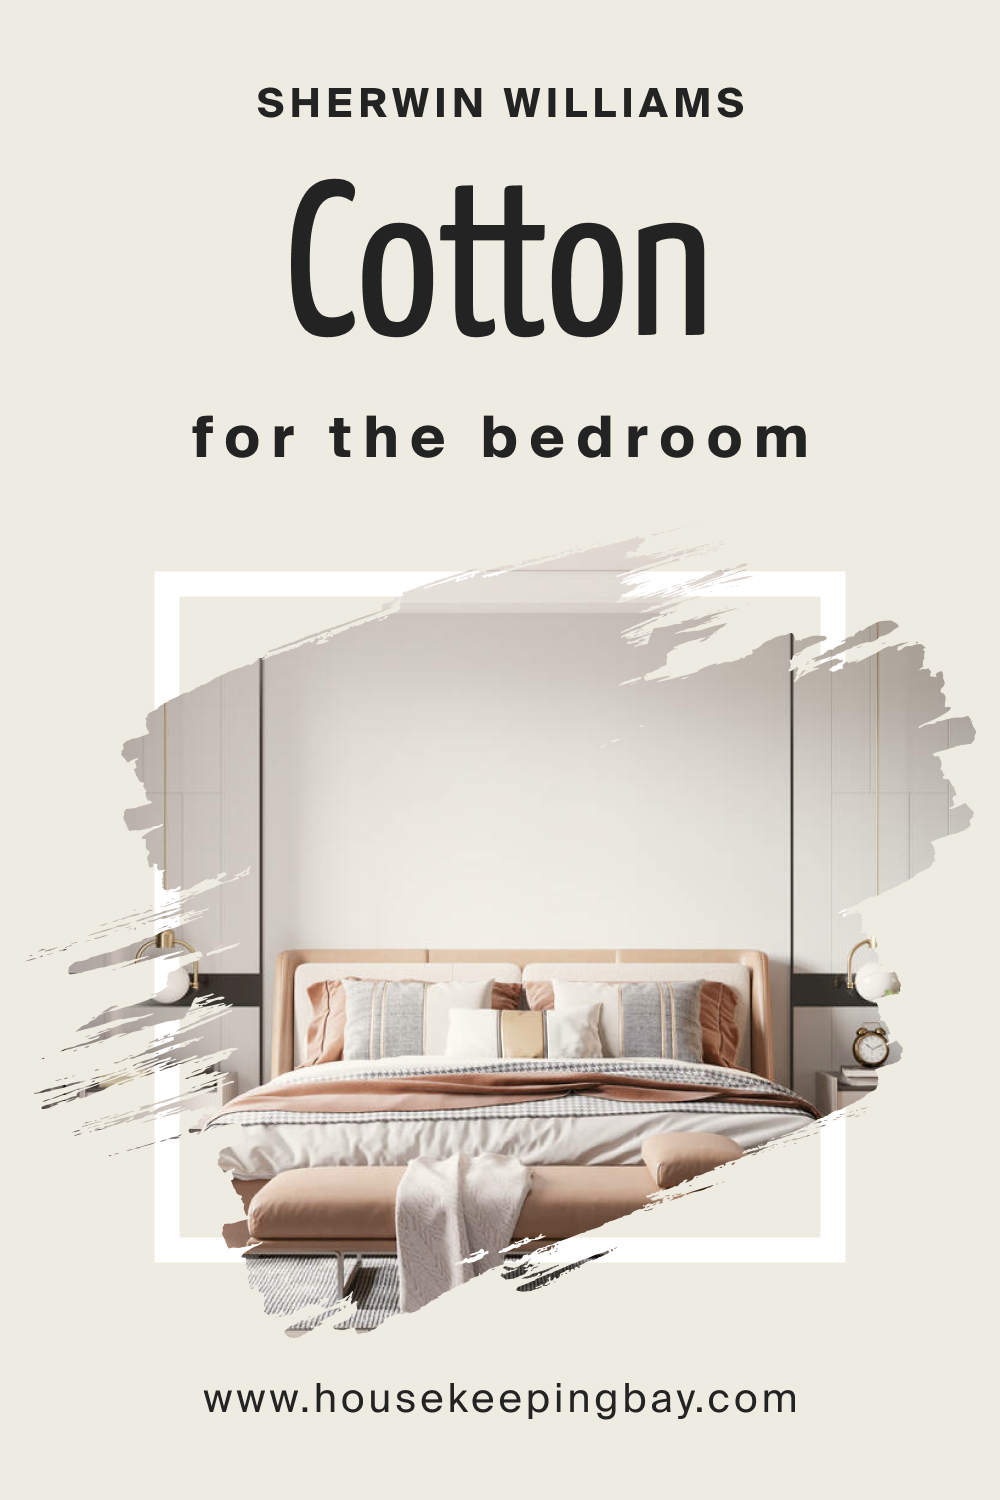 Sherwin Williams. SW 9581 Cotton For the bedroom